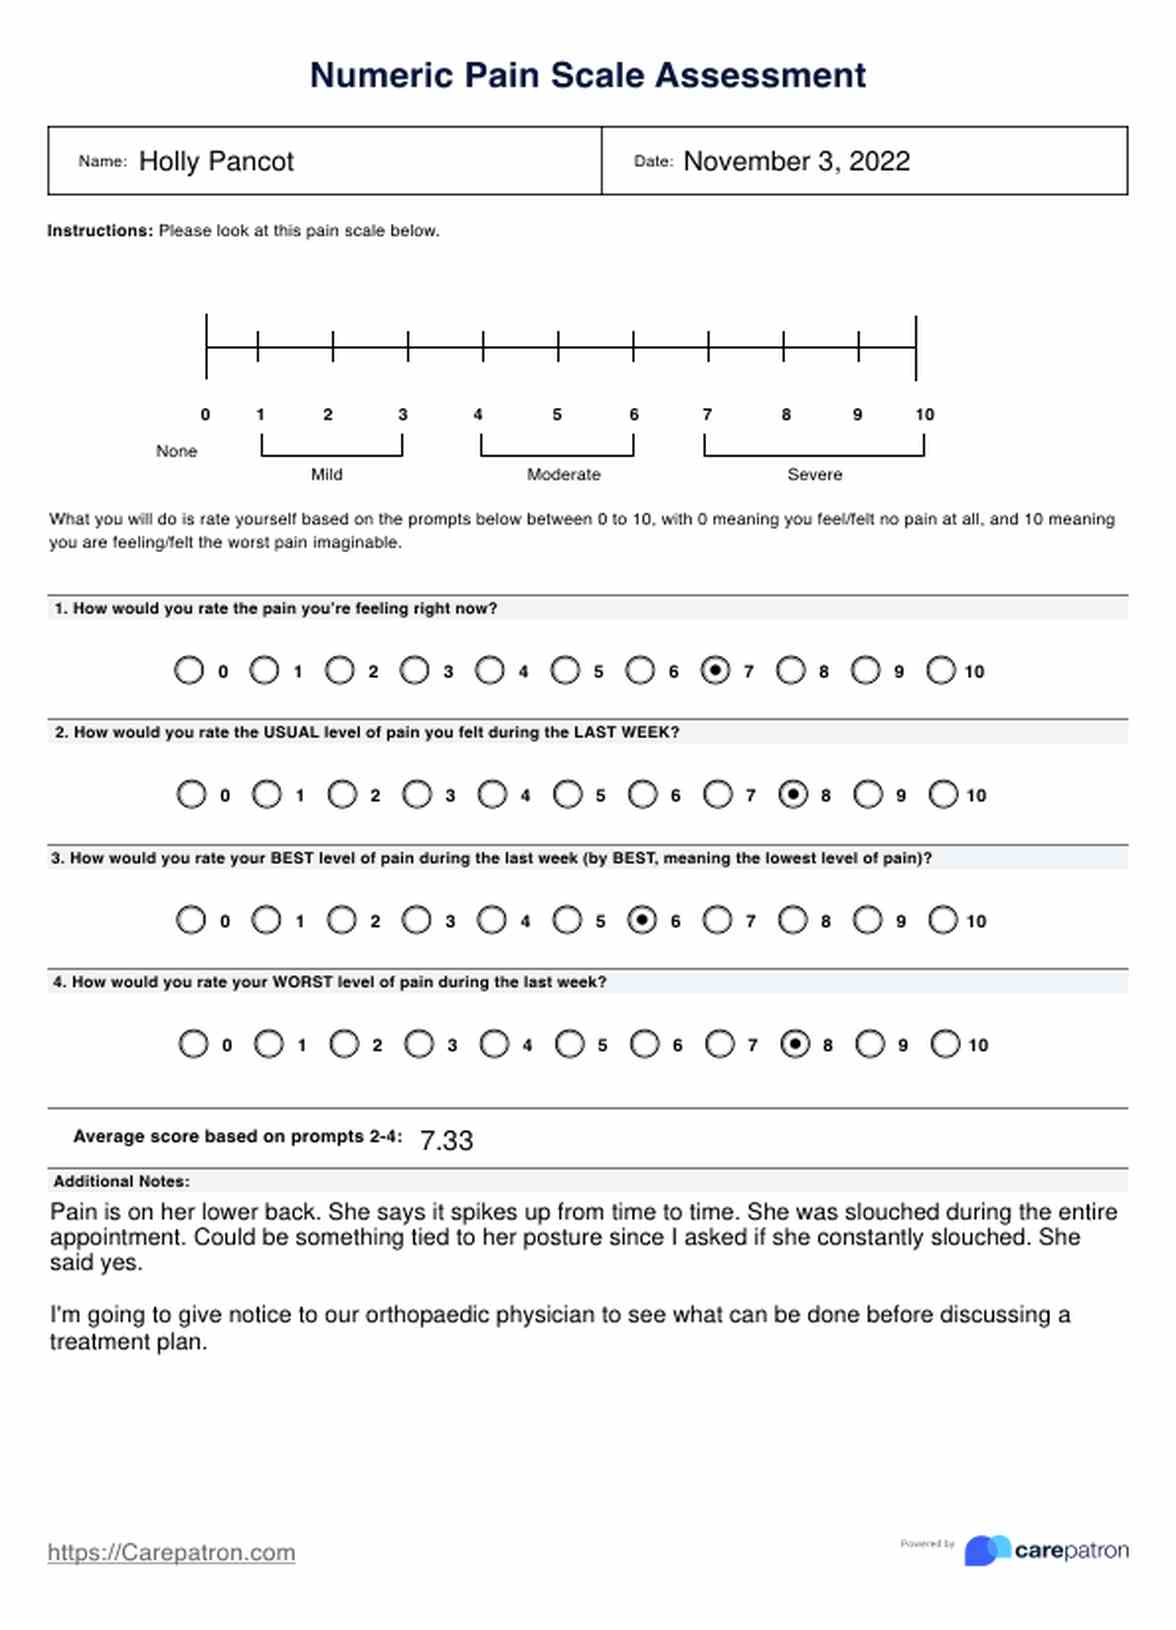 Numeric Pain Rating Scale PDF Example